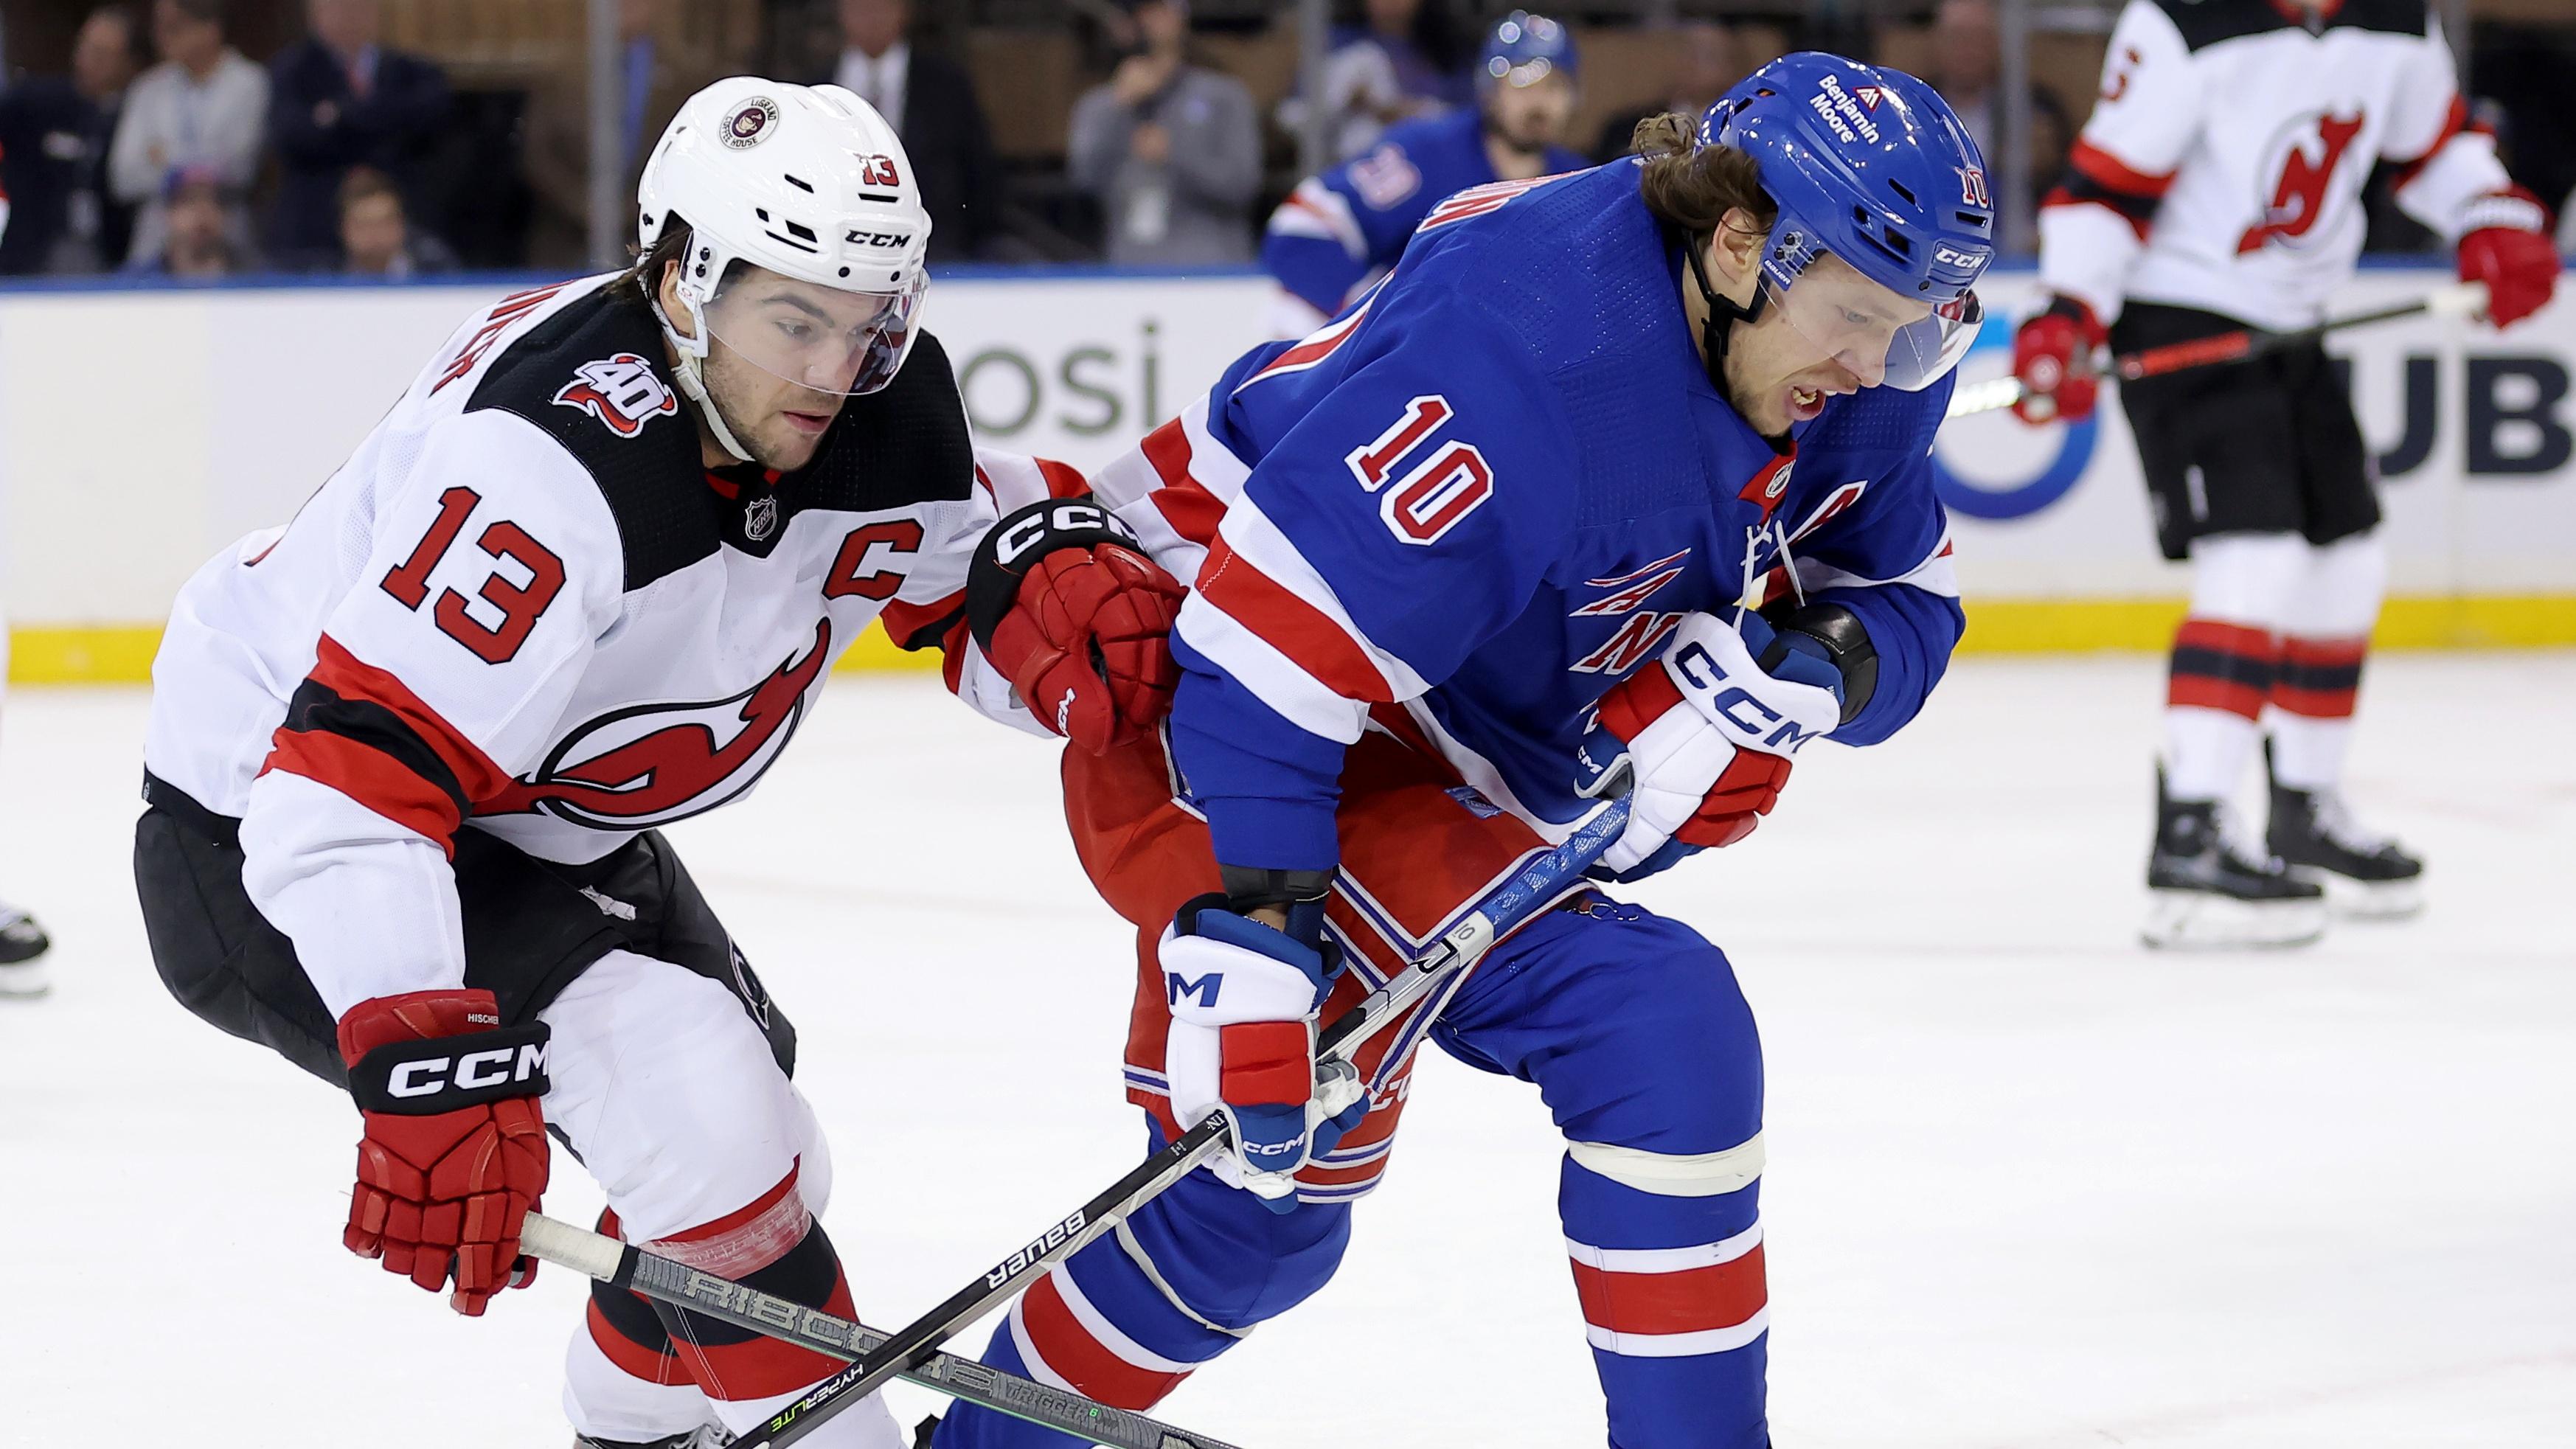 New York Rangers left wing Artemi Panarin (10) fights for the puck against New Jersey Devils center Nico Hischier (13) during the first period in game four of the first round of the 2023 Stanley Cup Playoffs at Madison Square Garden / Brad Penner - USA TODAY Sports